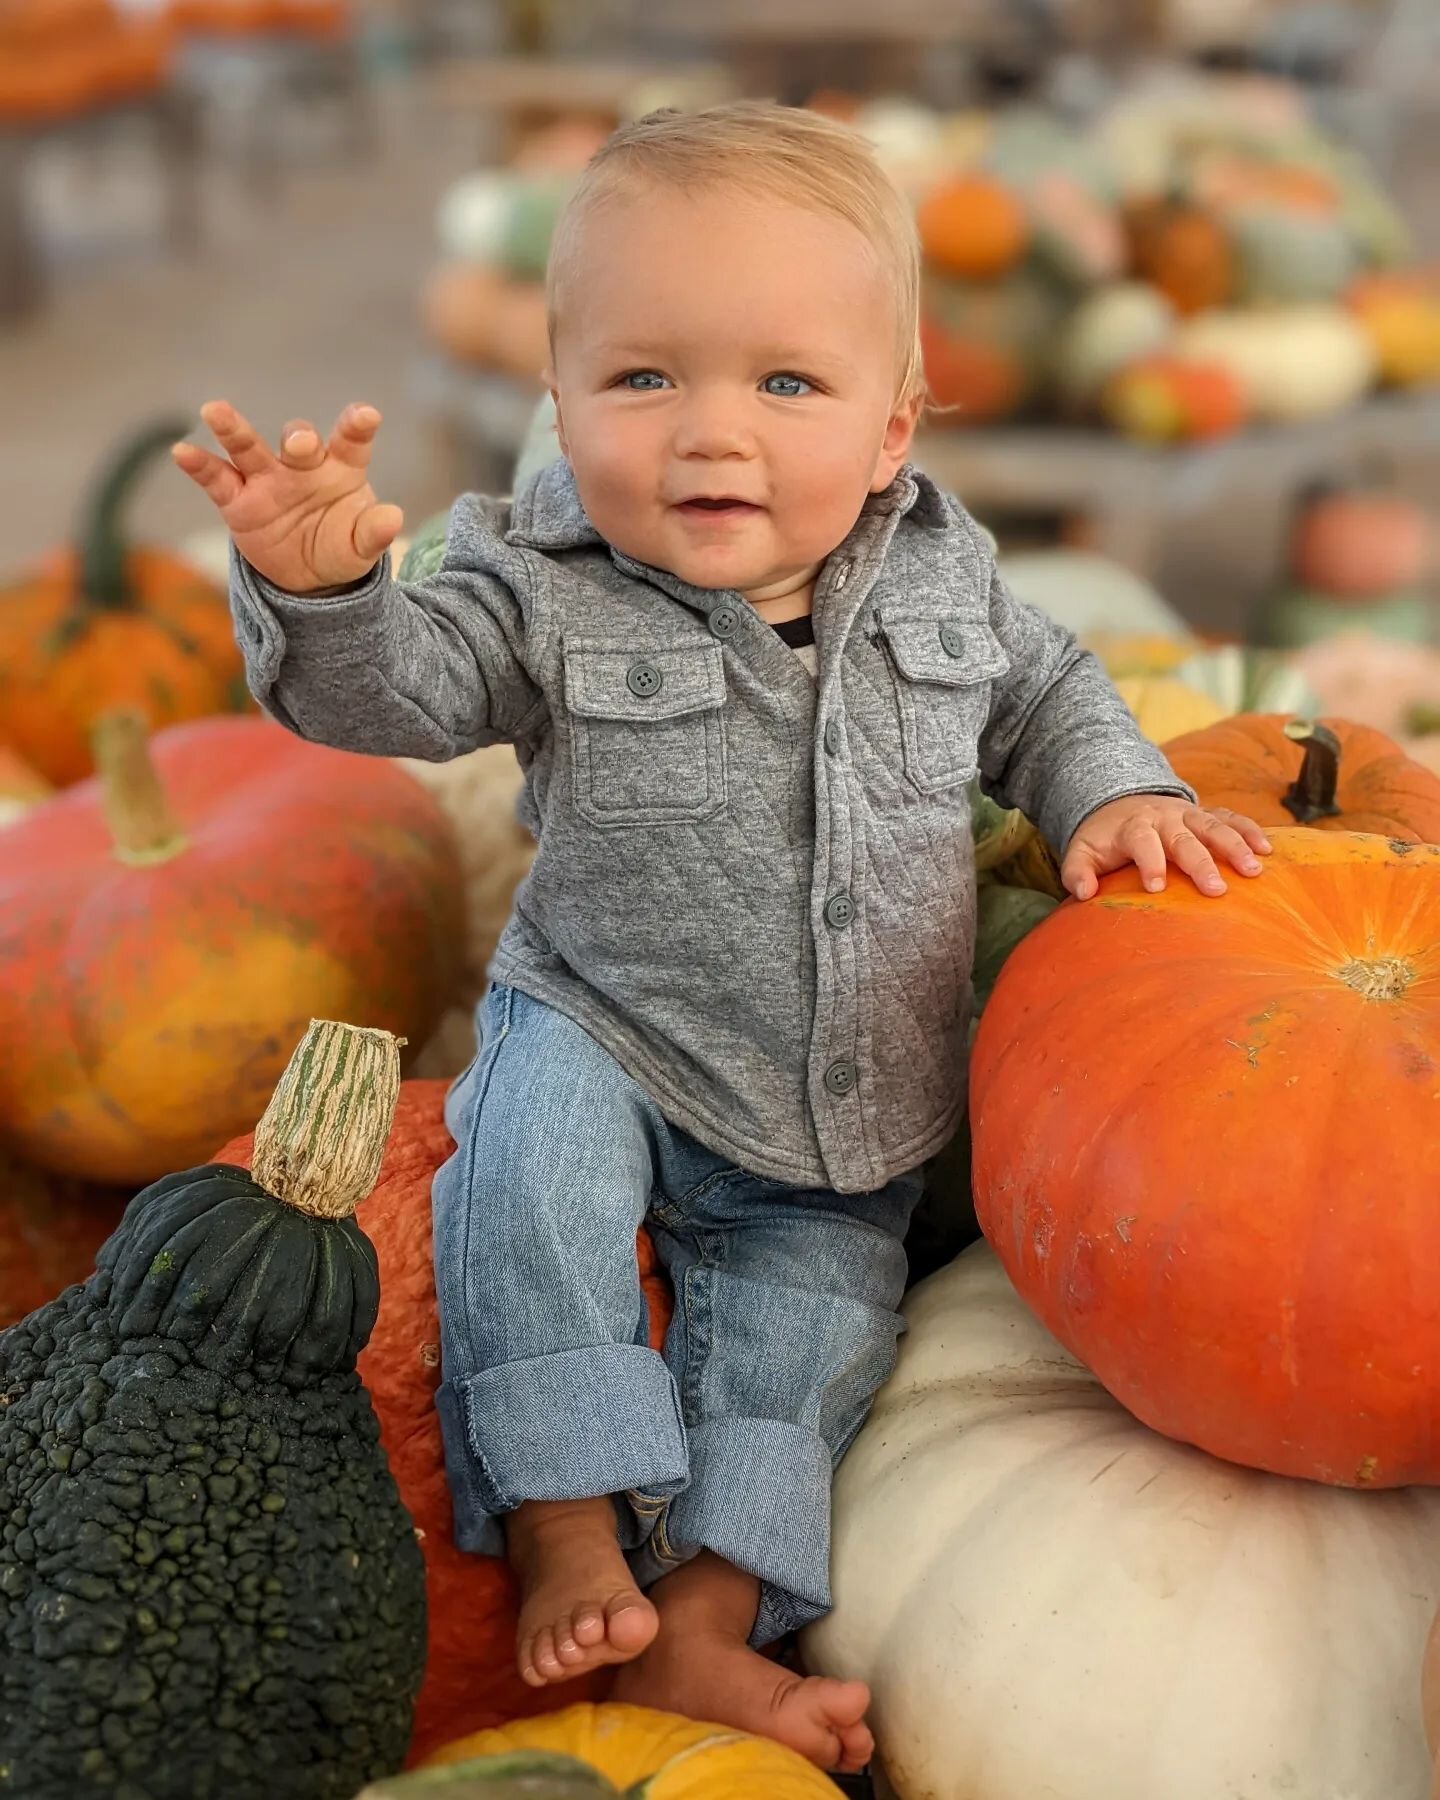 Levi wants you to know that Pumpkins + Gourds are Here!🍂 As well as straw bales, cornstalks, mums, cabbages and everything else you need to decorate for Fall!🌾